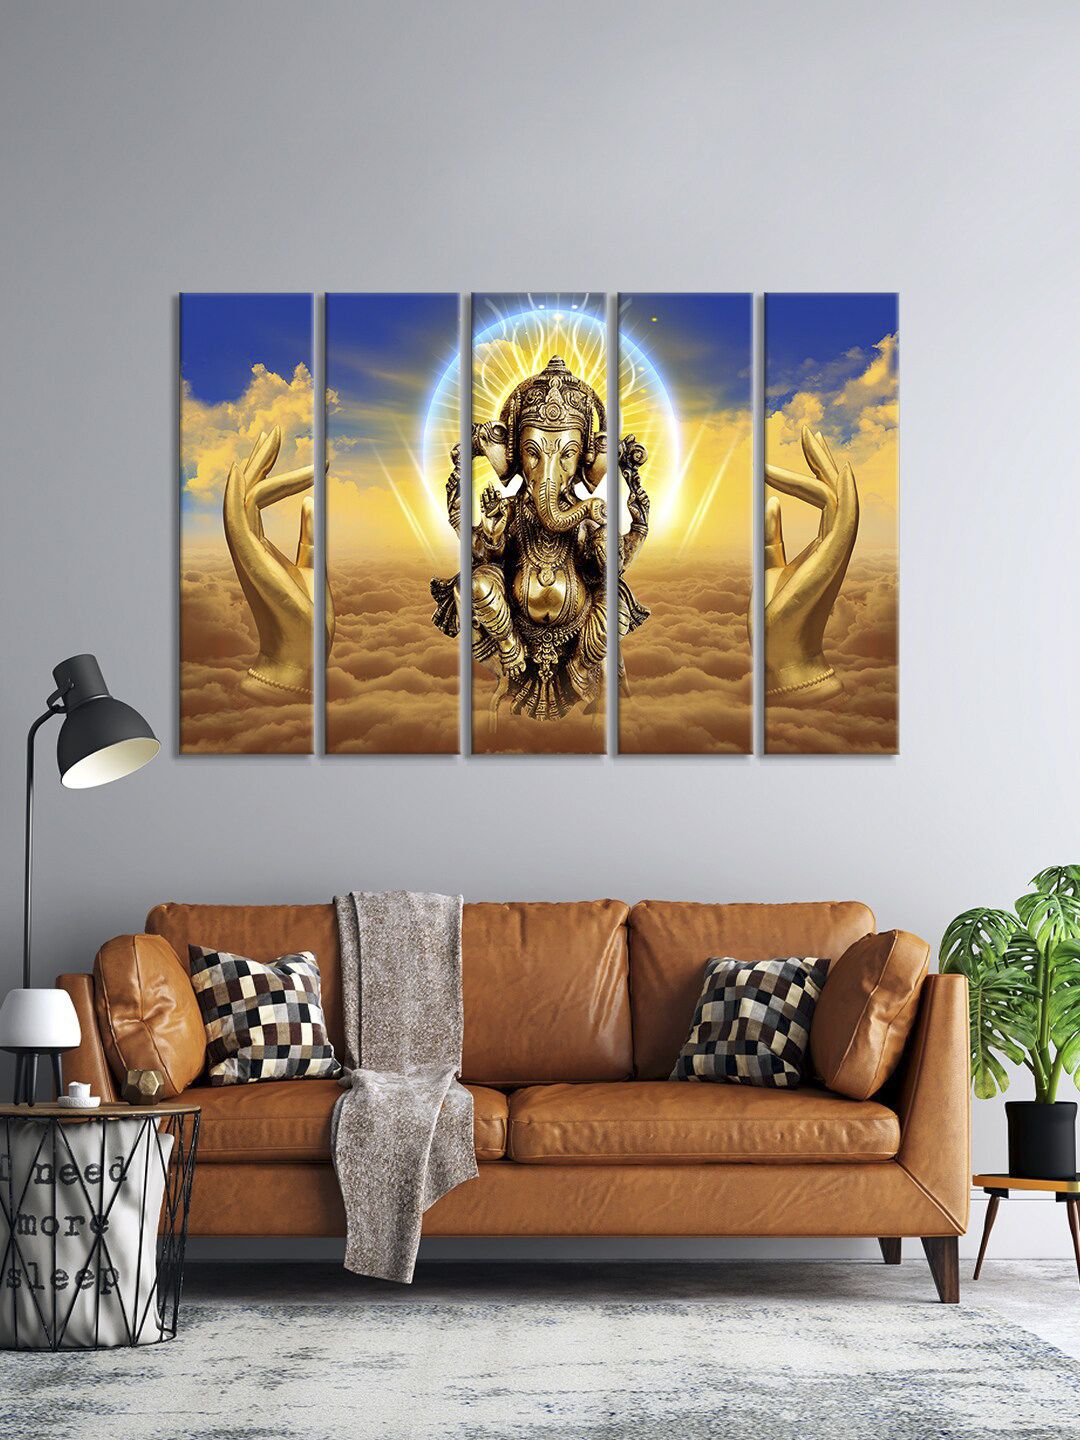 999Store Set Of 5 Brown & Blue Golden Colour Of Lord Ganesha Painting Framed Wall Art Price in India